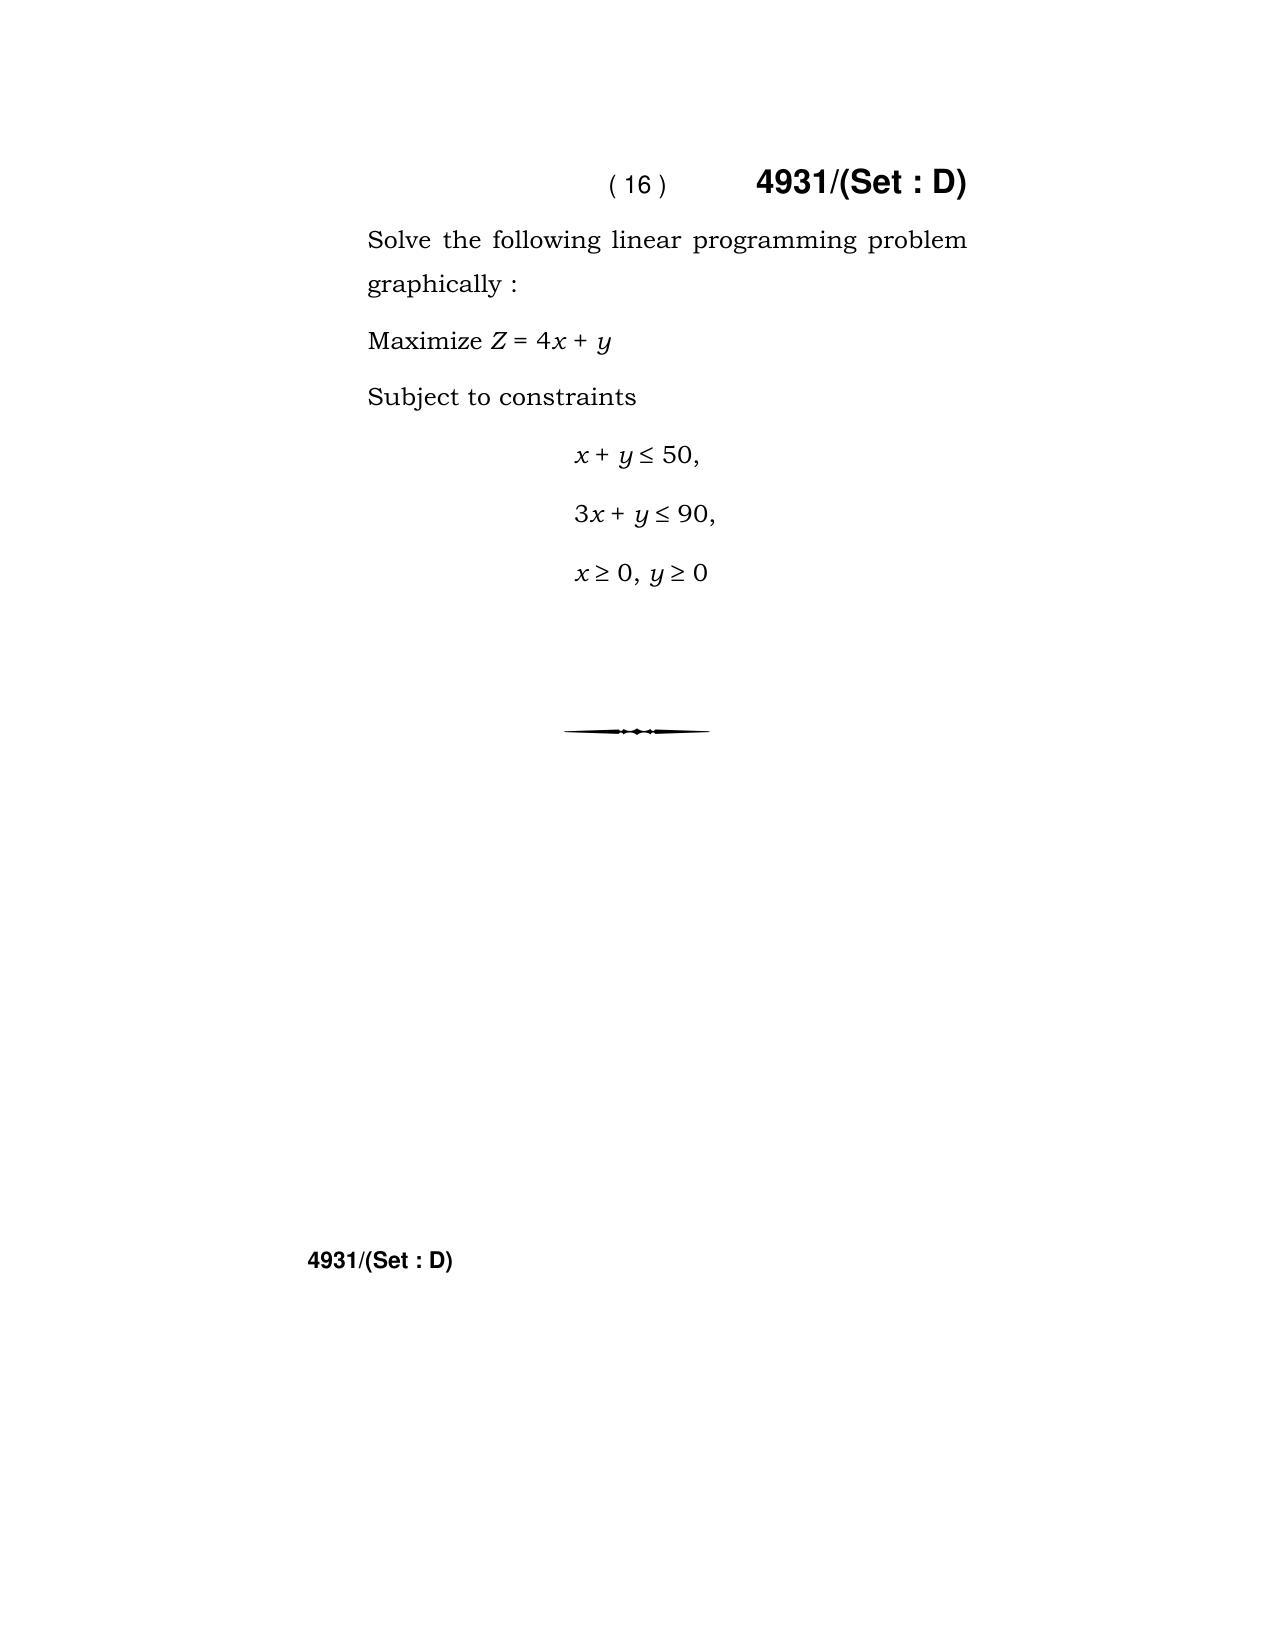 Haryana Board HBSE Class 12 Mathematics 2020 Question Paper - Page 64